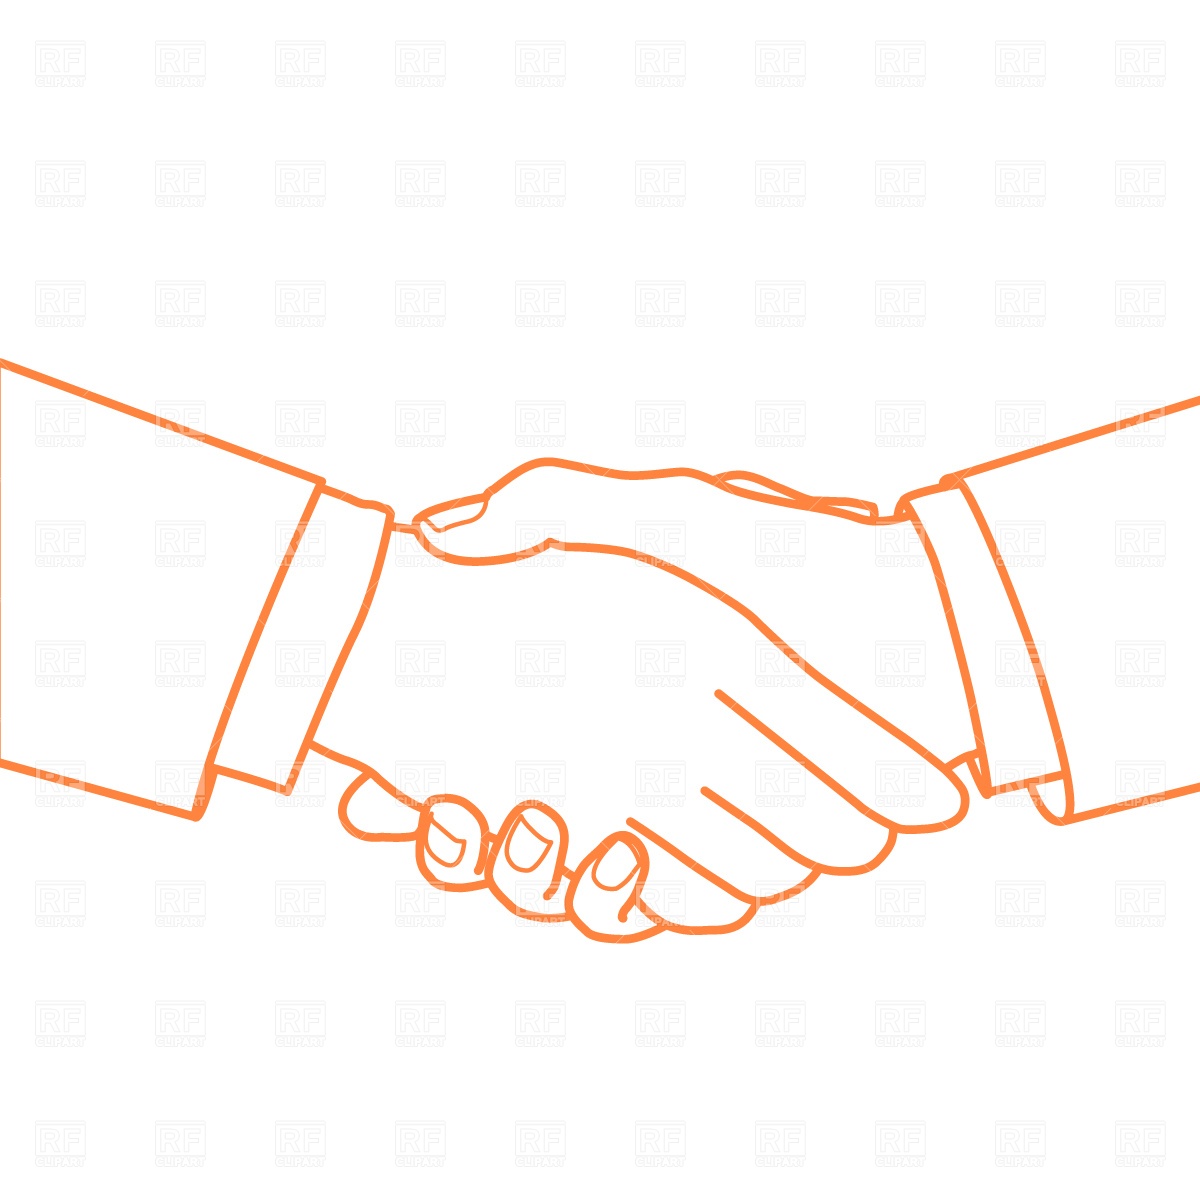 Handshake clipart 6 free images clipartwork 2